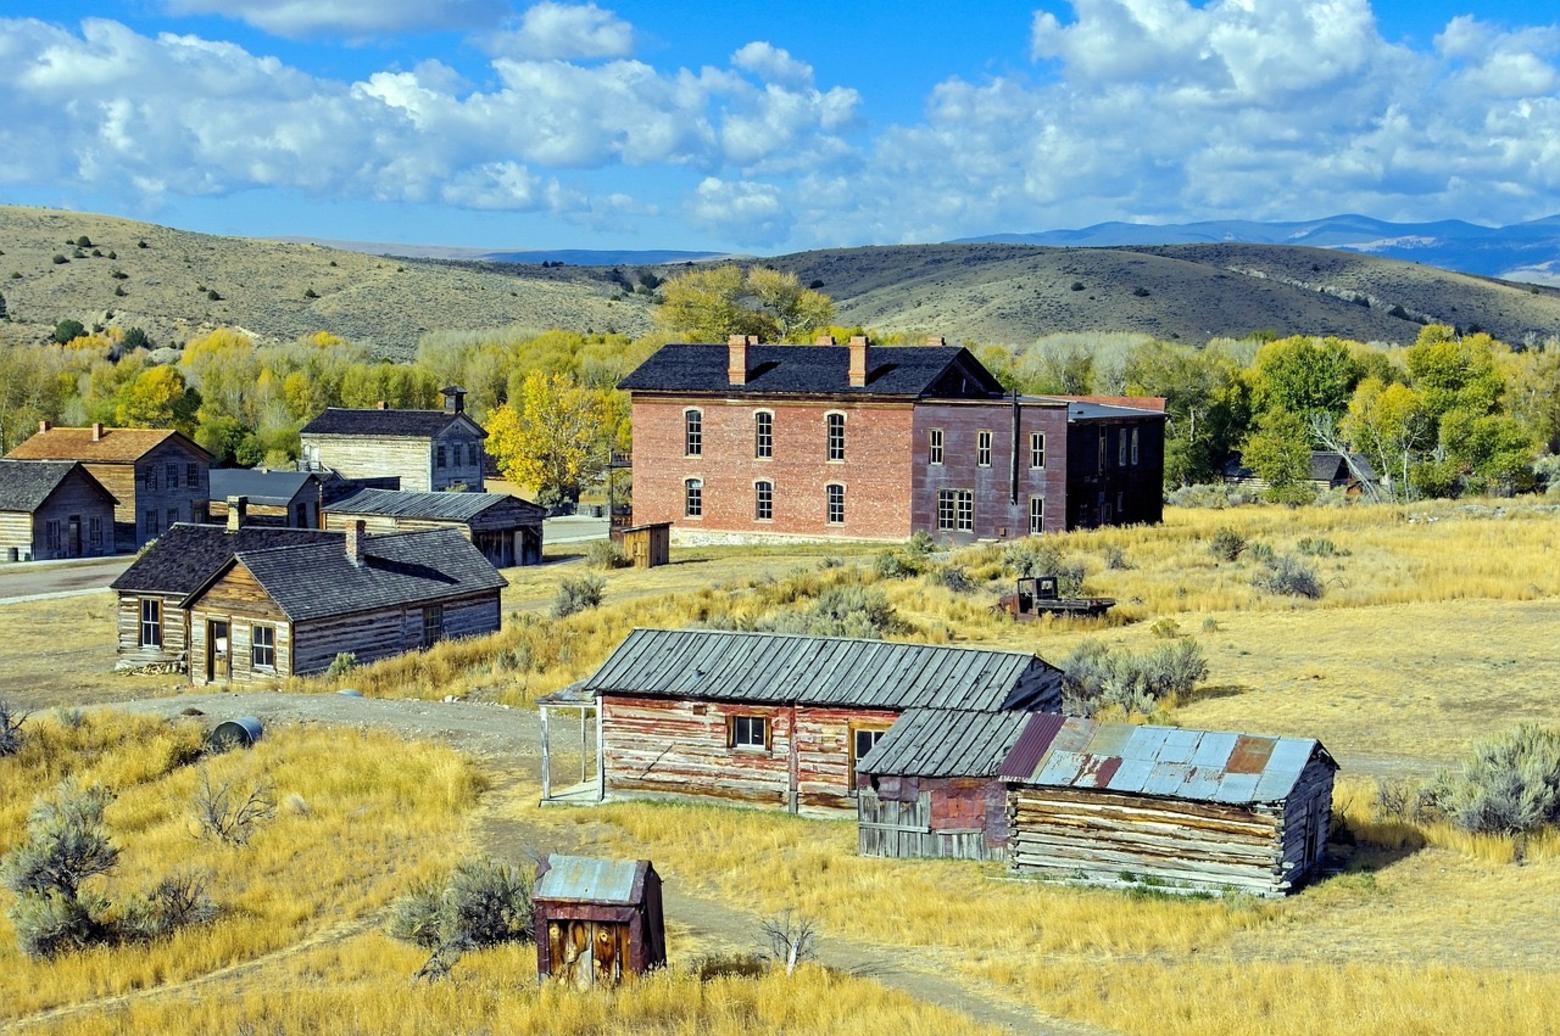 Podcast Gives Life To Dying Towns, Stories Across American West